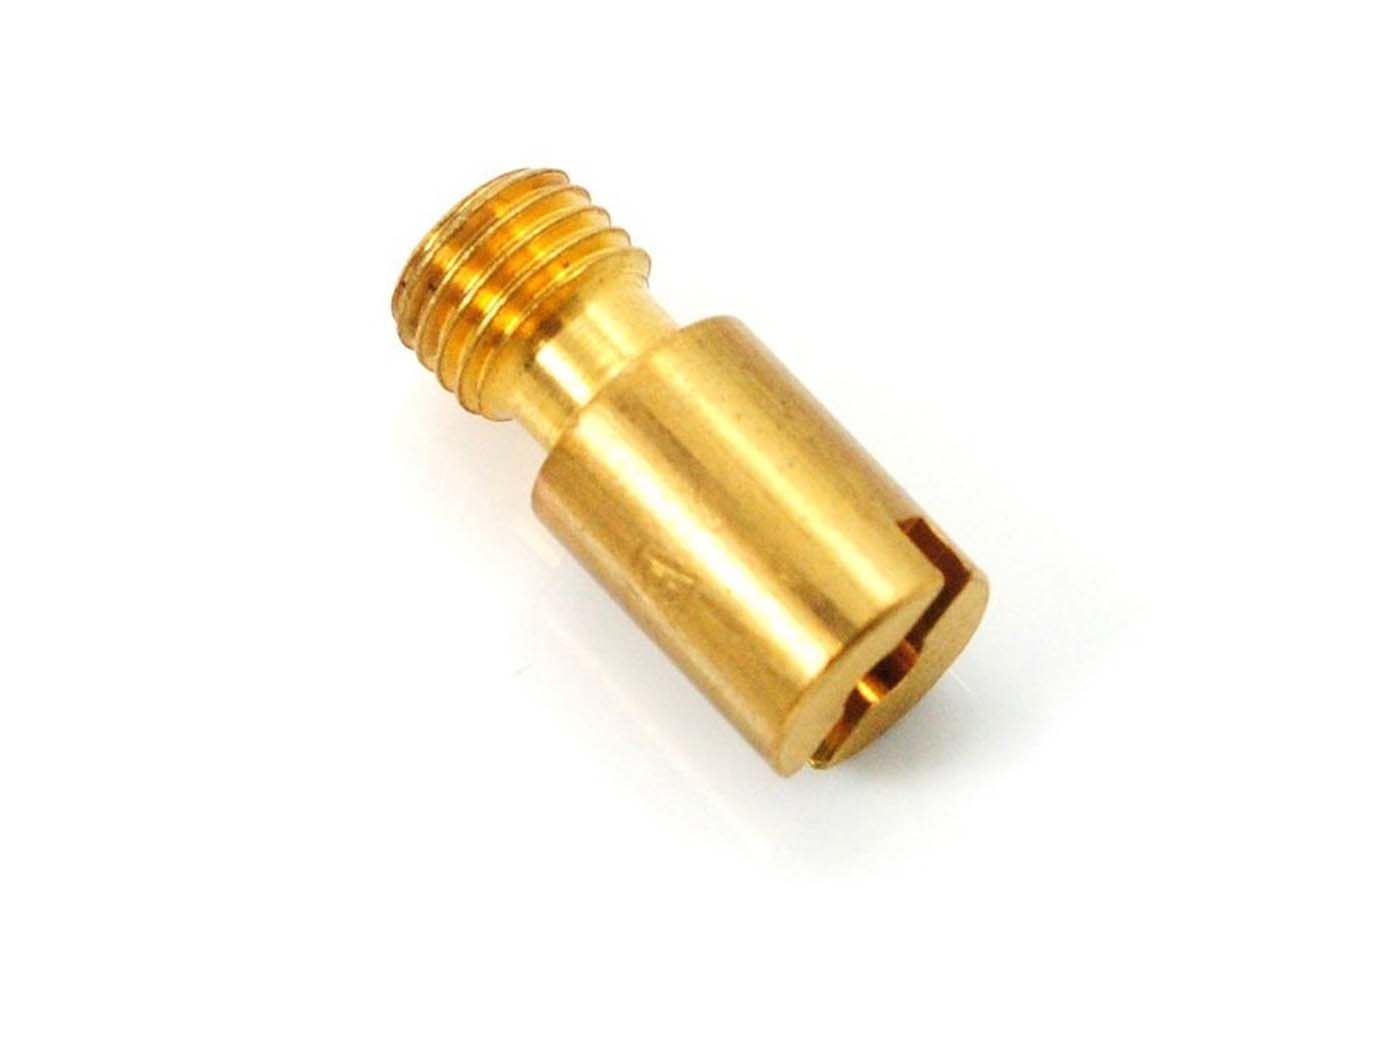 Needle Jet 2.12mm For Bing Carburetor Type 1/12/233 And 1/12/244 For Puch MS, Puch VS, Puch DS, Puch VZ, Puch M, Zündap Super Combintte C 50